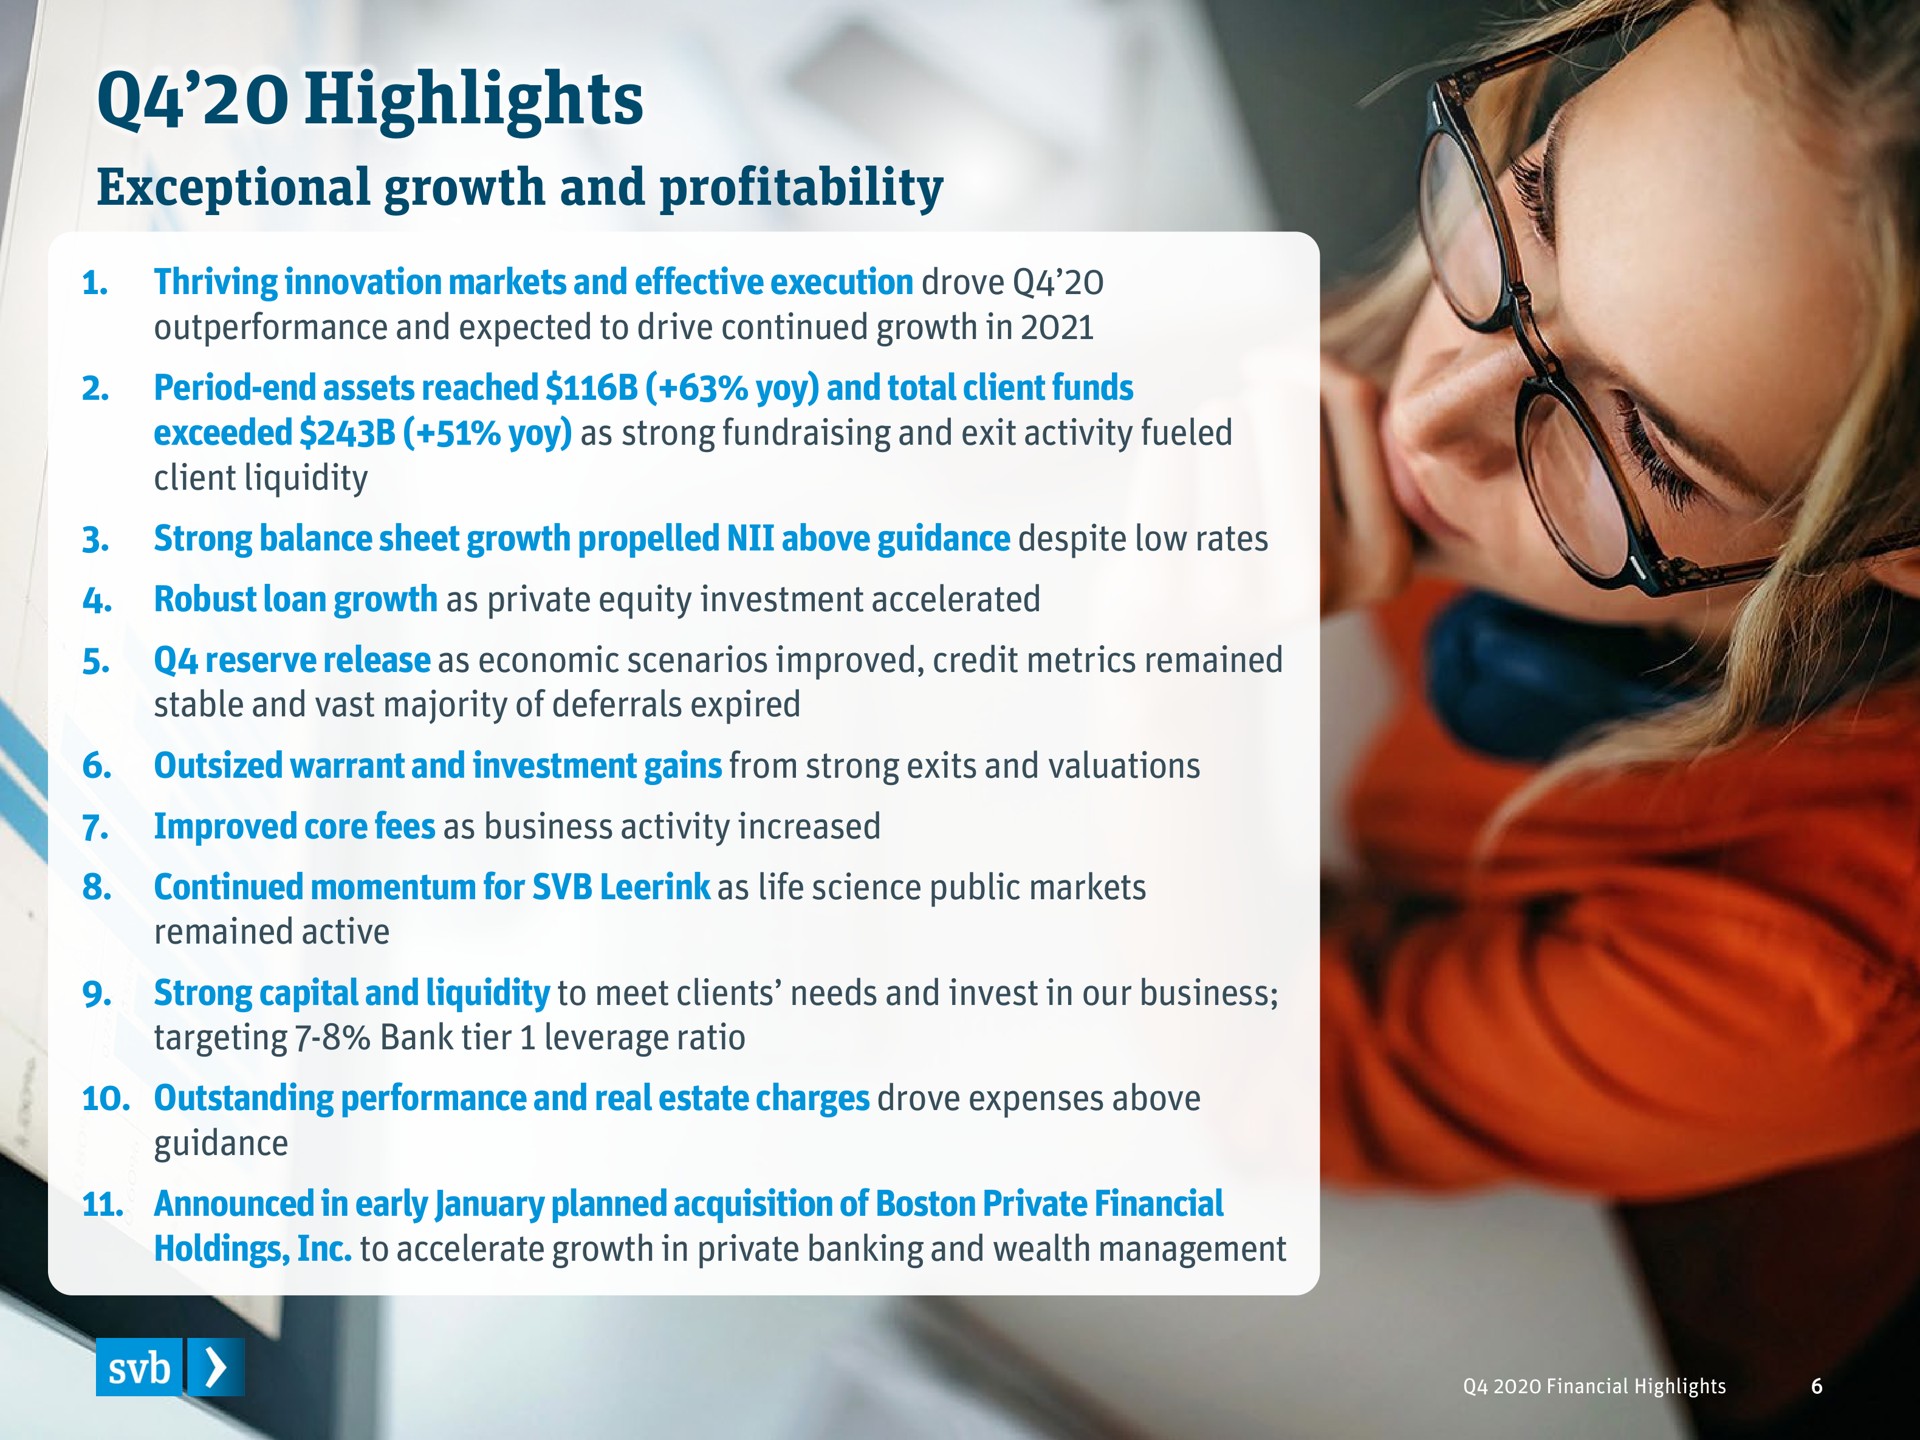 highlights exceptional growth and profitability | Silicon Valley Bank